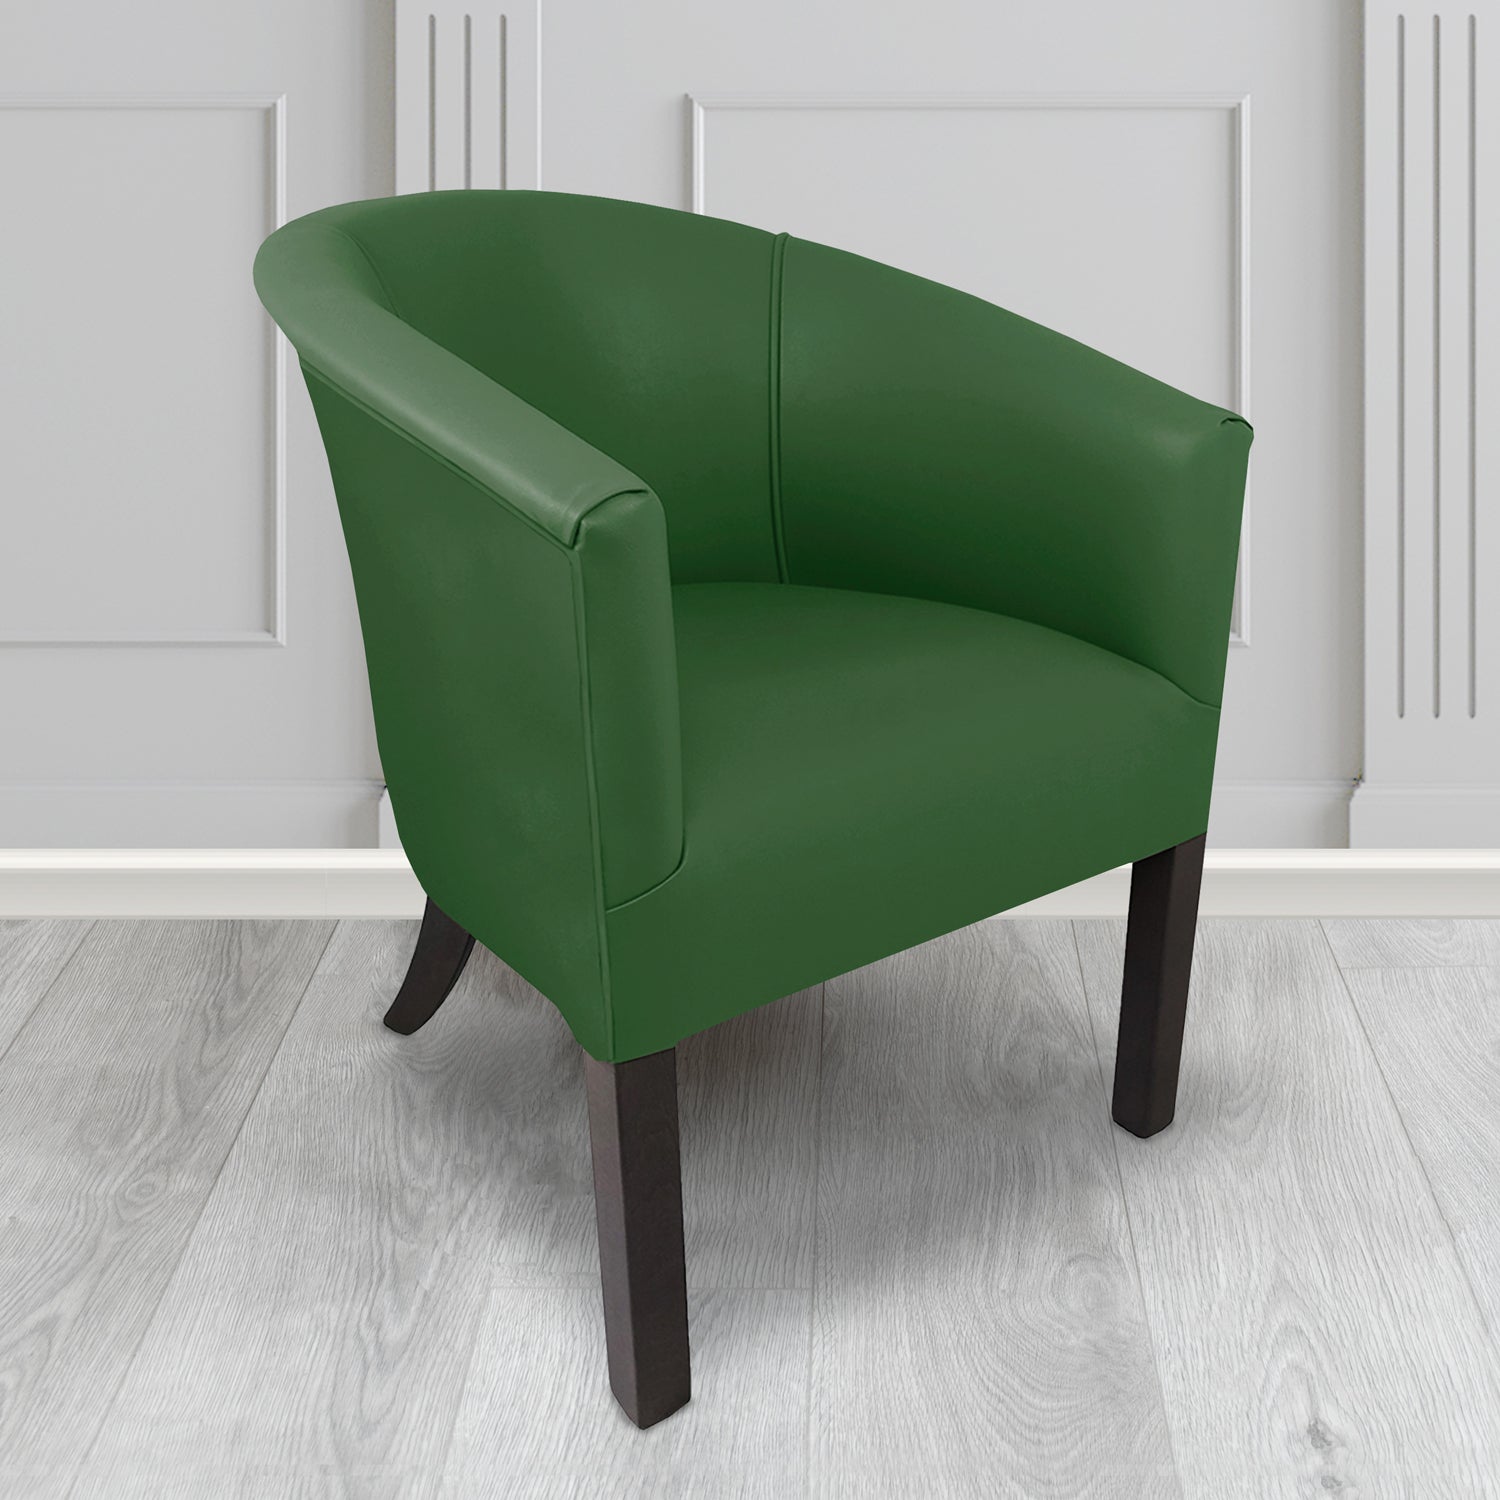 Lewisham Tub Chair in Agua Paint Pot Grass Crib 5 Faux Leather - Antimicrobial, Stain Resistant & Waterproof - The Tub Chair Shop